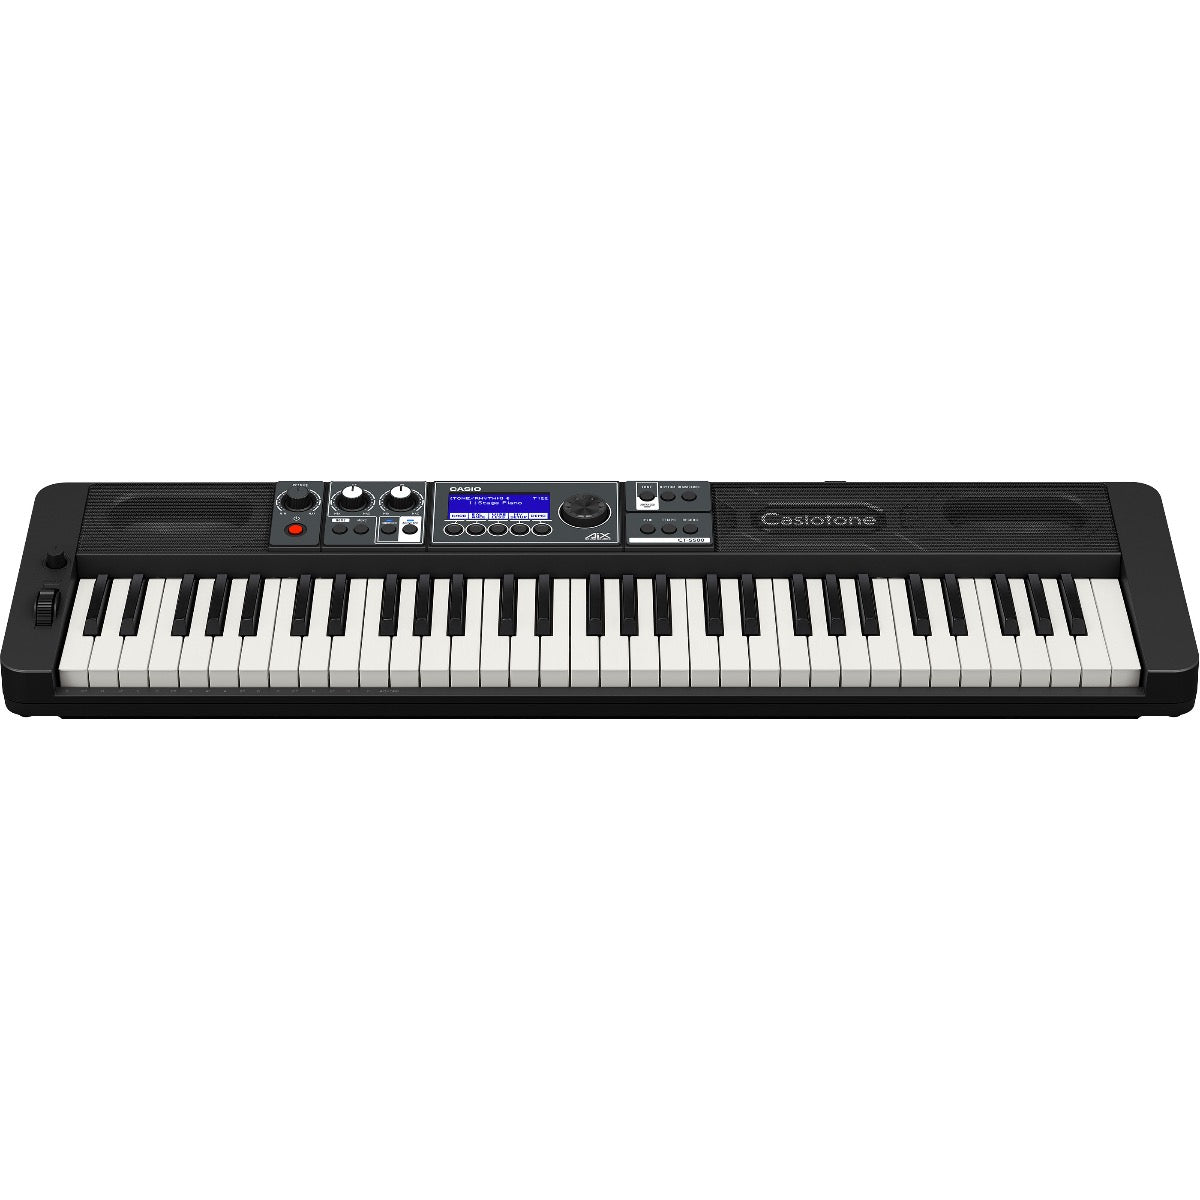 Casio Casiotone CT-S500 Portable Keyboard View 4